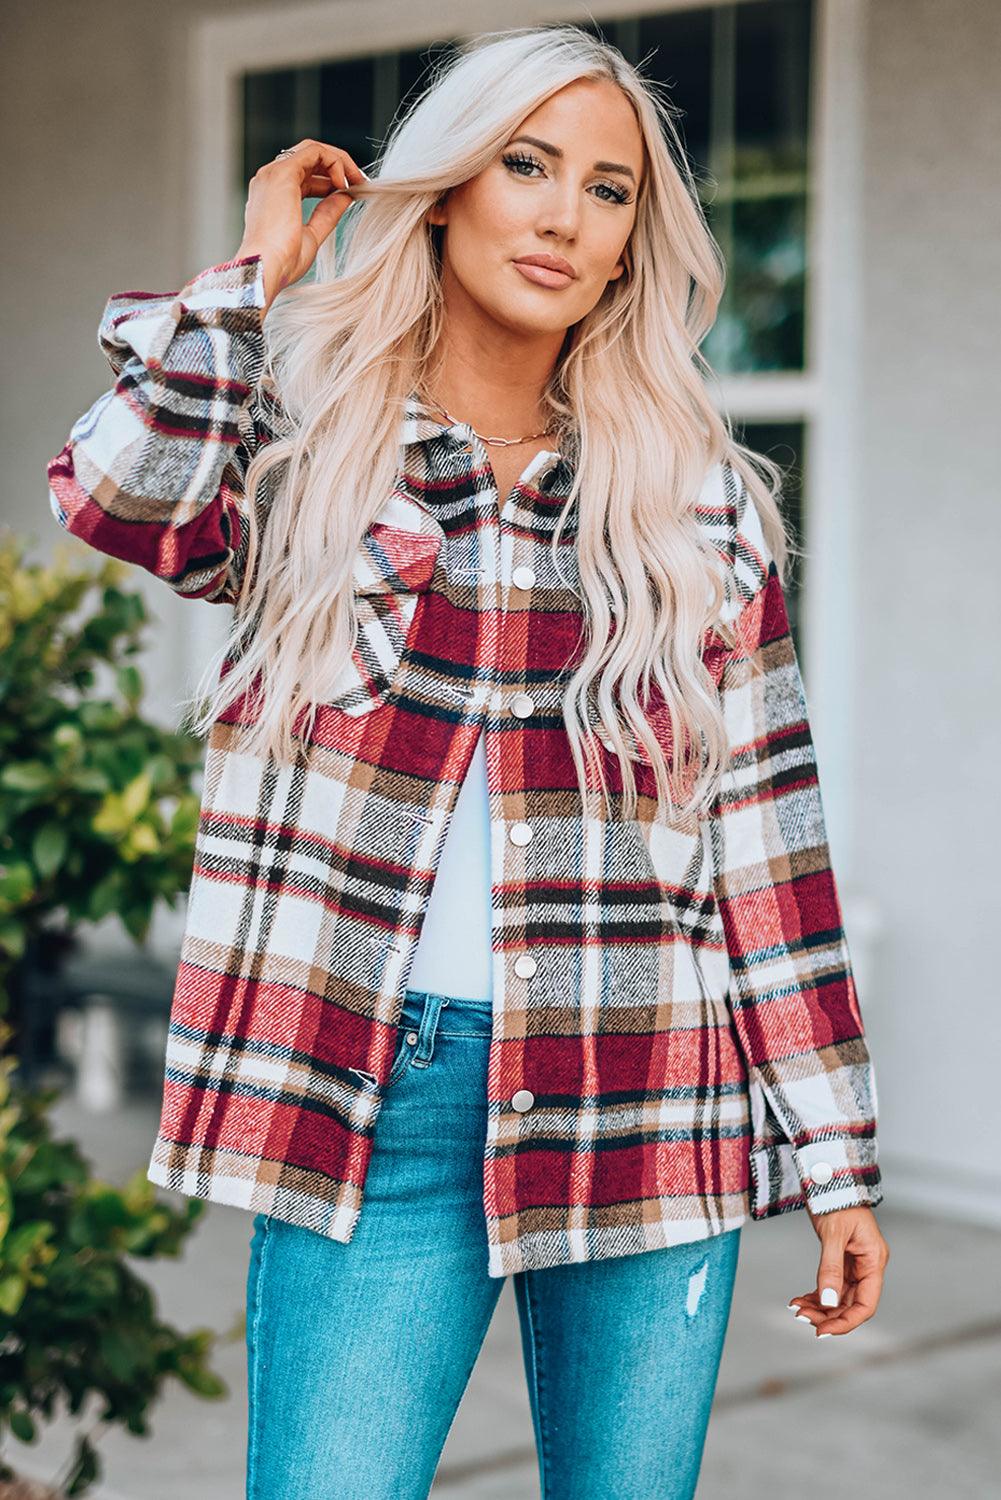 Plaid Button Front Shirt Jacket with Breast Pockets - Flyclothing LLC